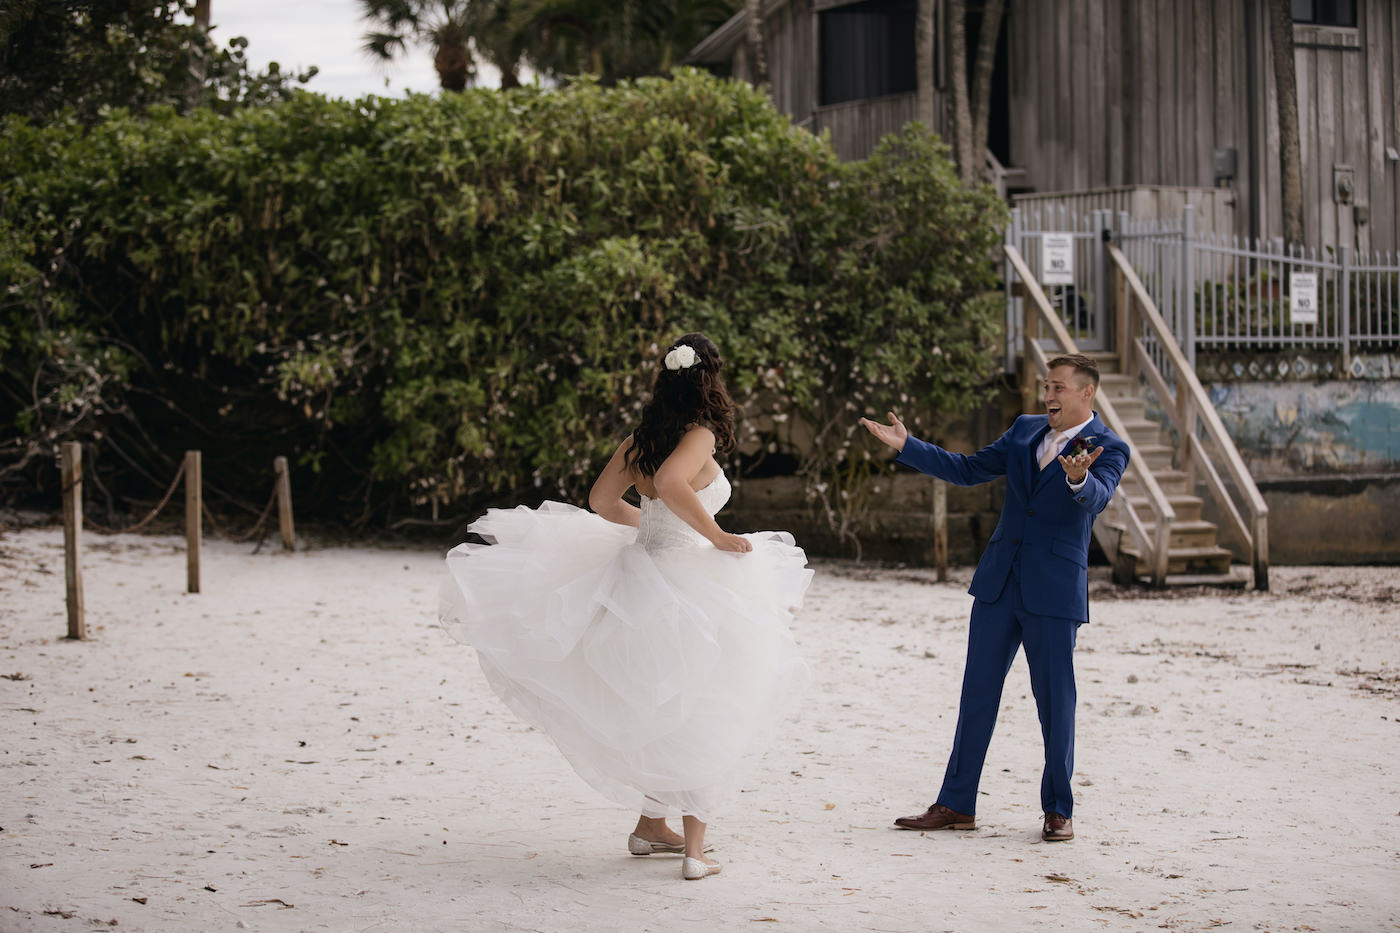 Outdoor Bride and Groom Portrait | Bride and Groom First Look Sarasota Beach Wedding | Groom in Navy Blue Suit with Blush Pink Neck Tie | Bride Twirling in Tulle Organza Ballgown